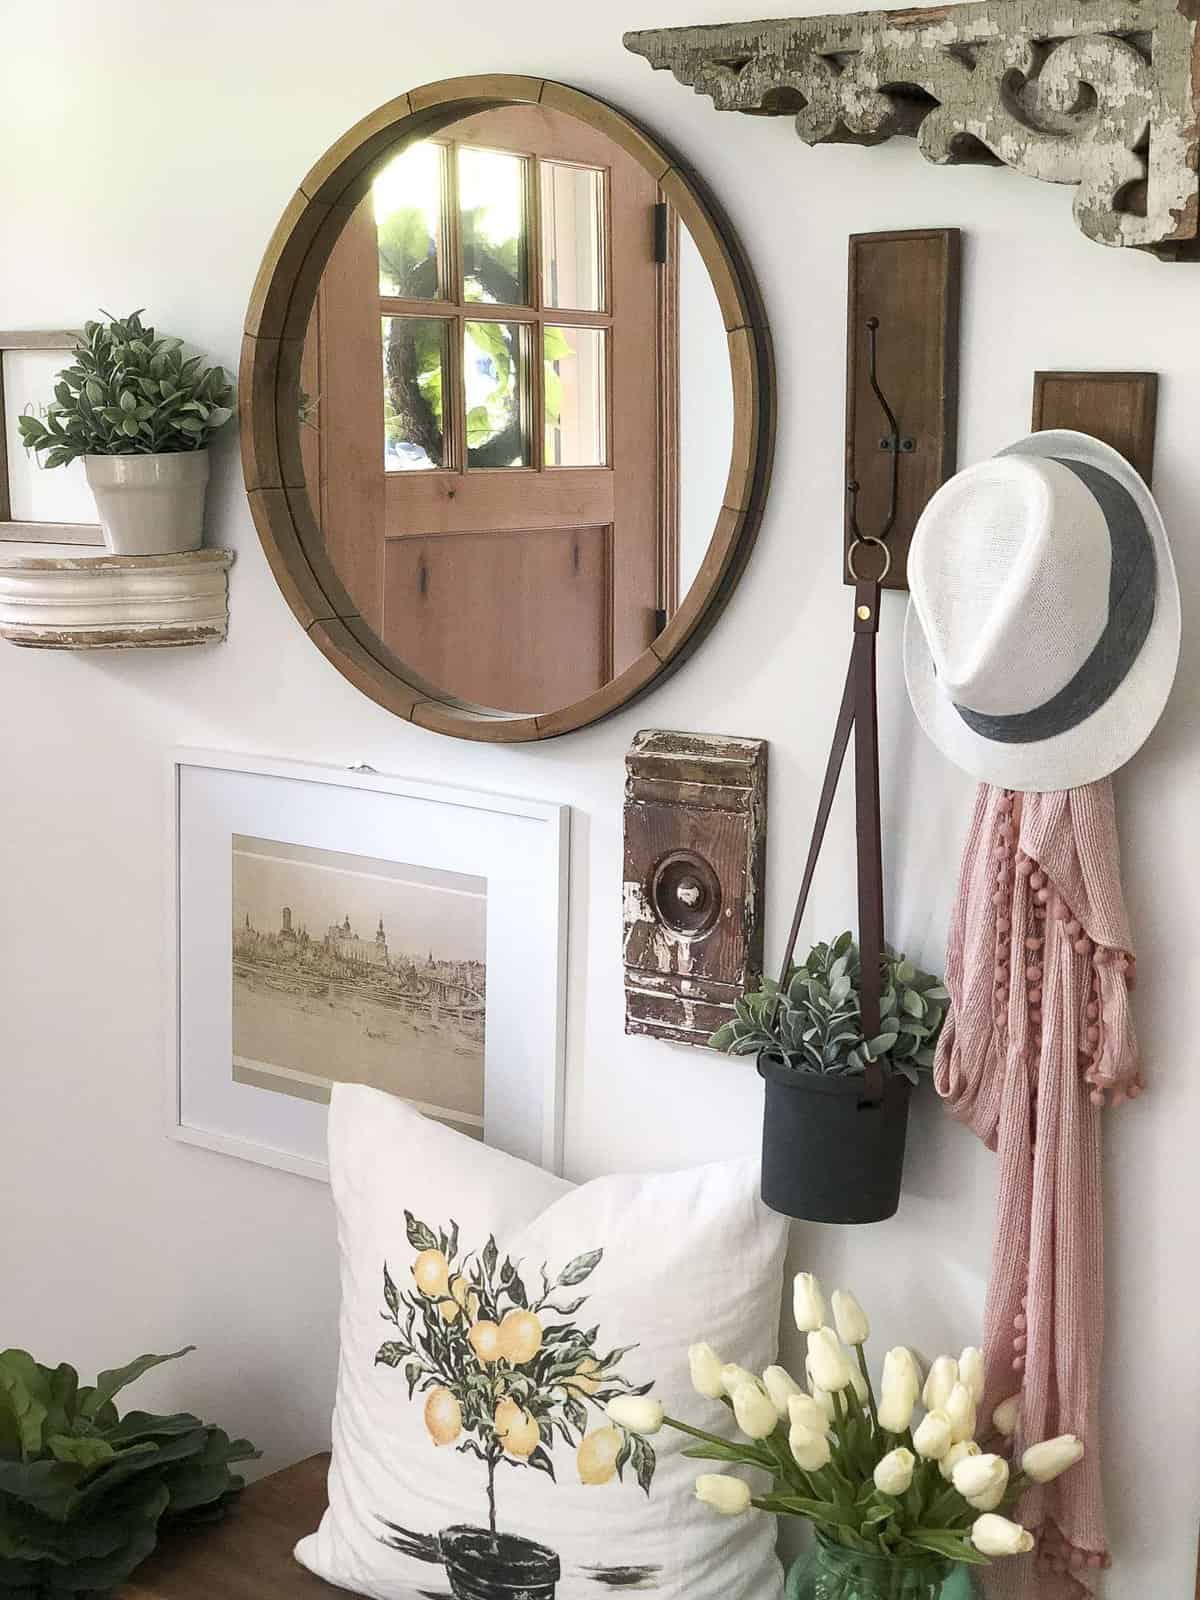 How To Create a Welcoming Summer Entryway. Easy ideas to design your summer entryway for easy, breezy, & simple entertaining. Welcome your guests with style.